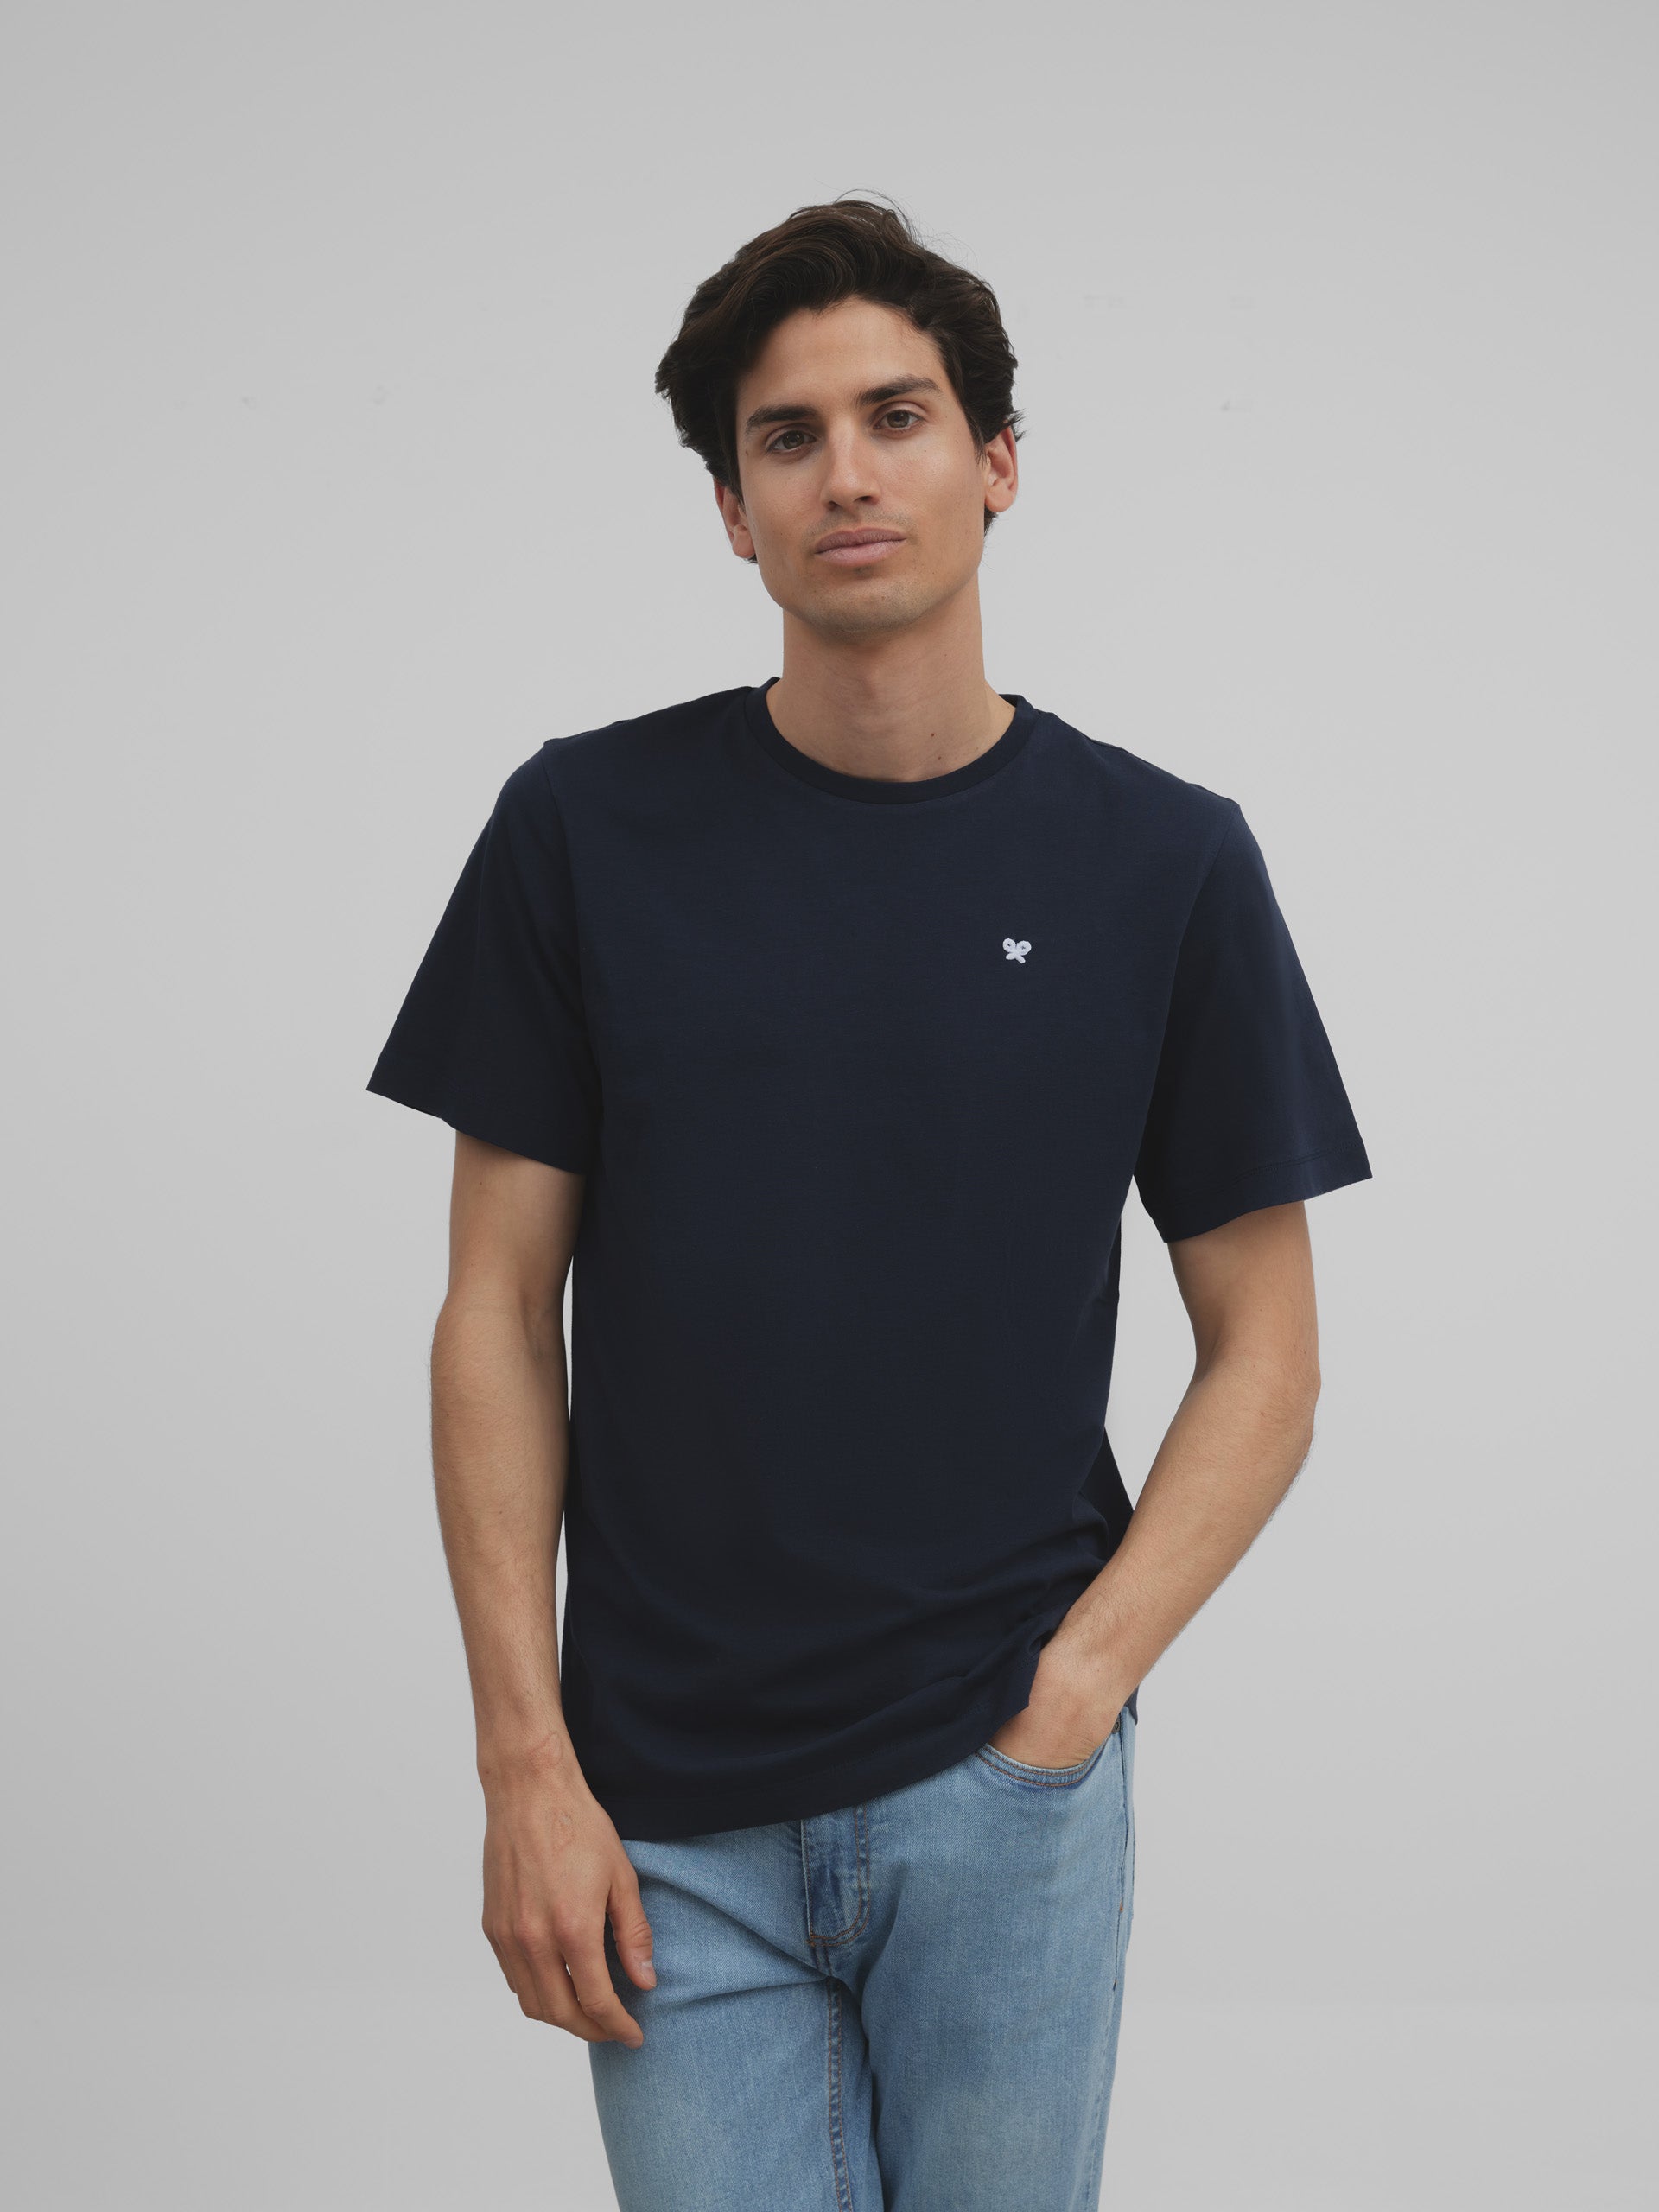 Navy blue surf and chill t-shirt